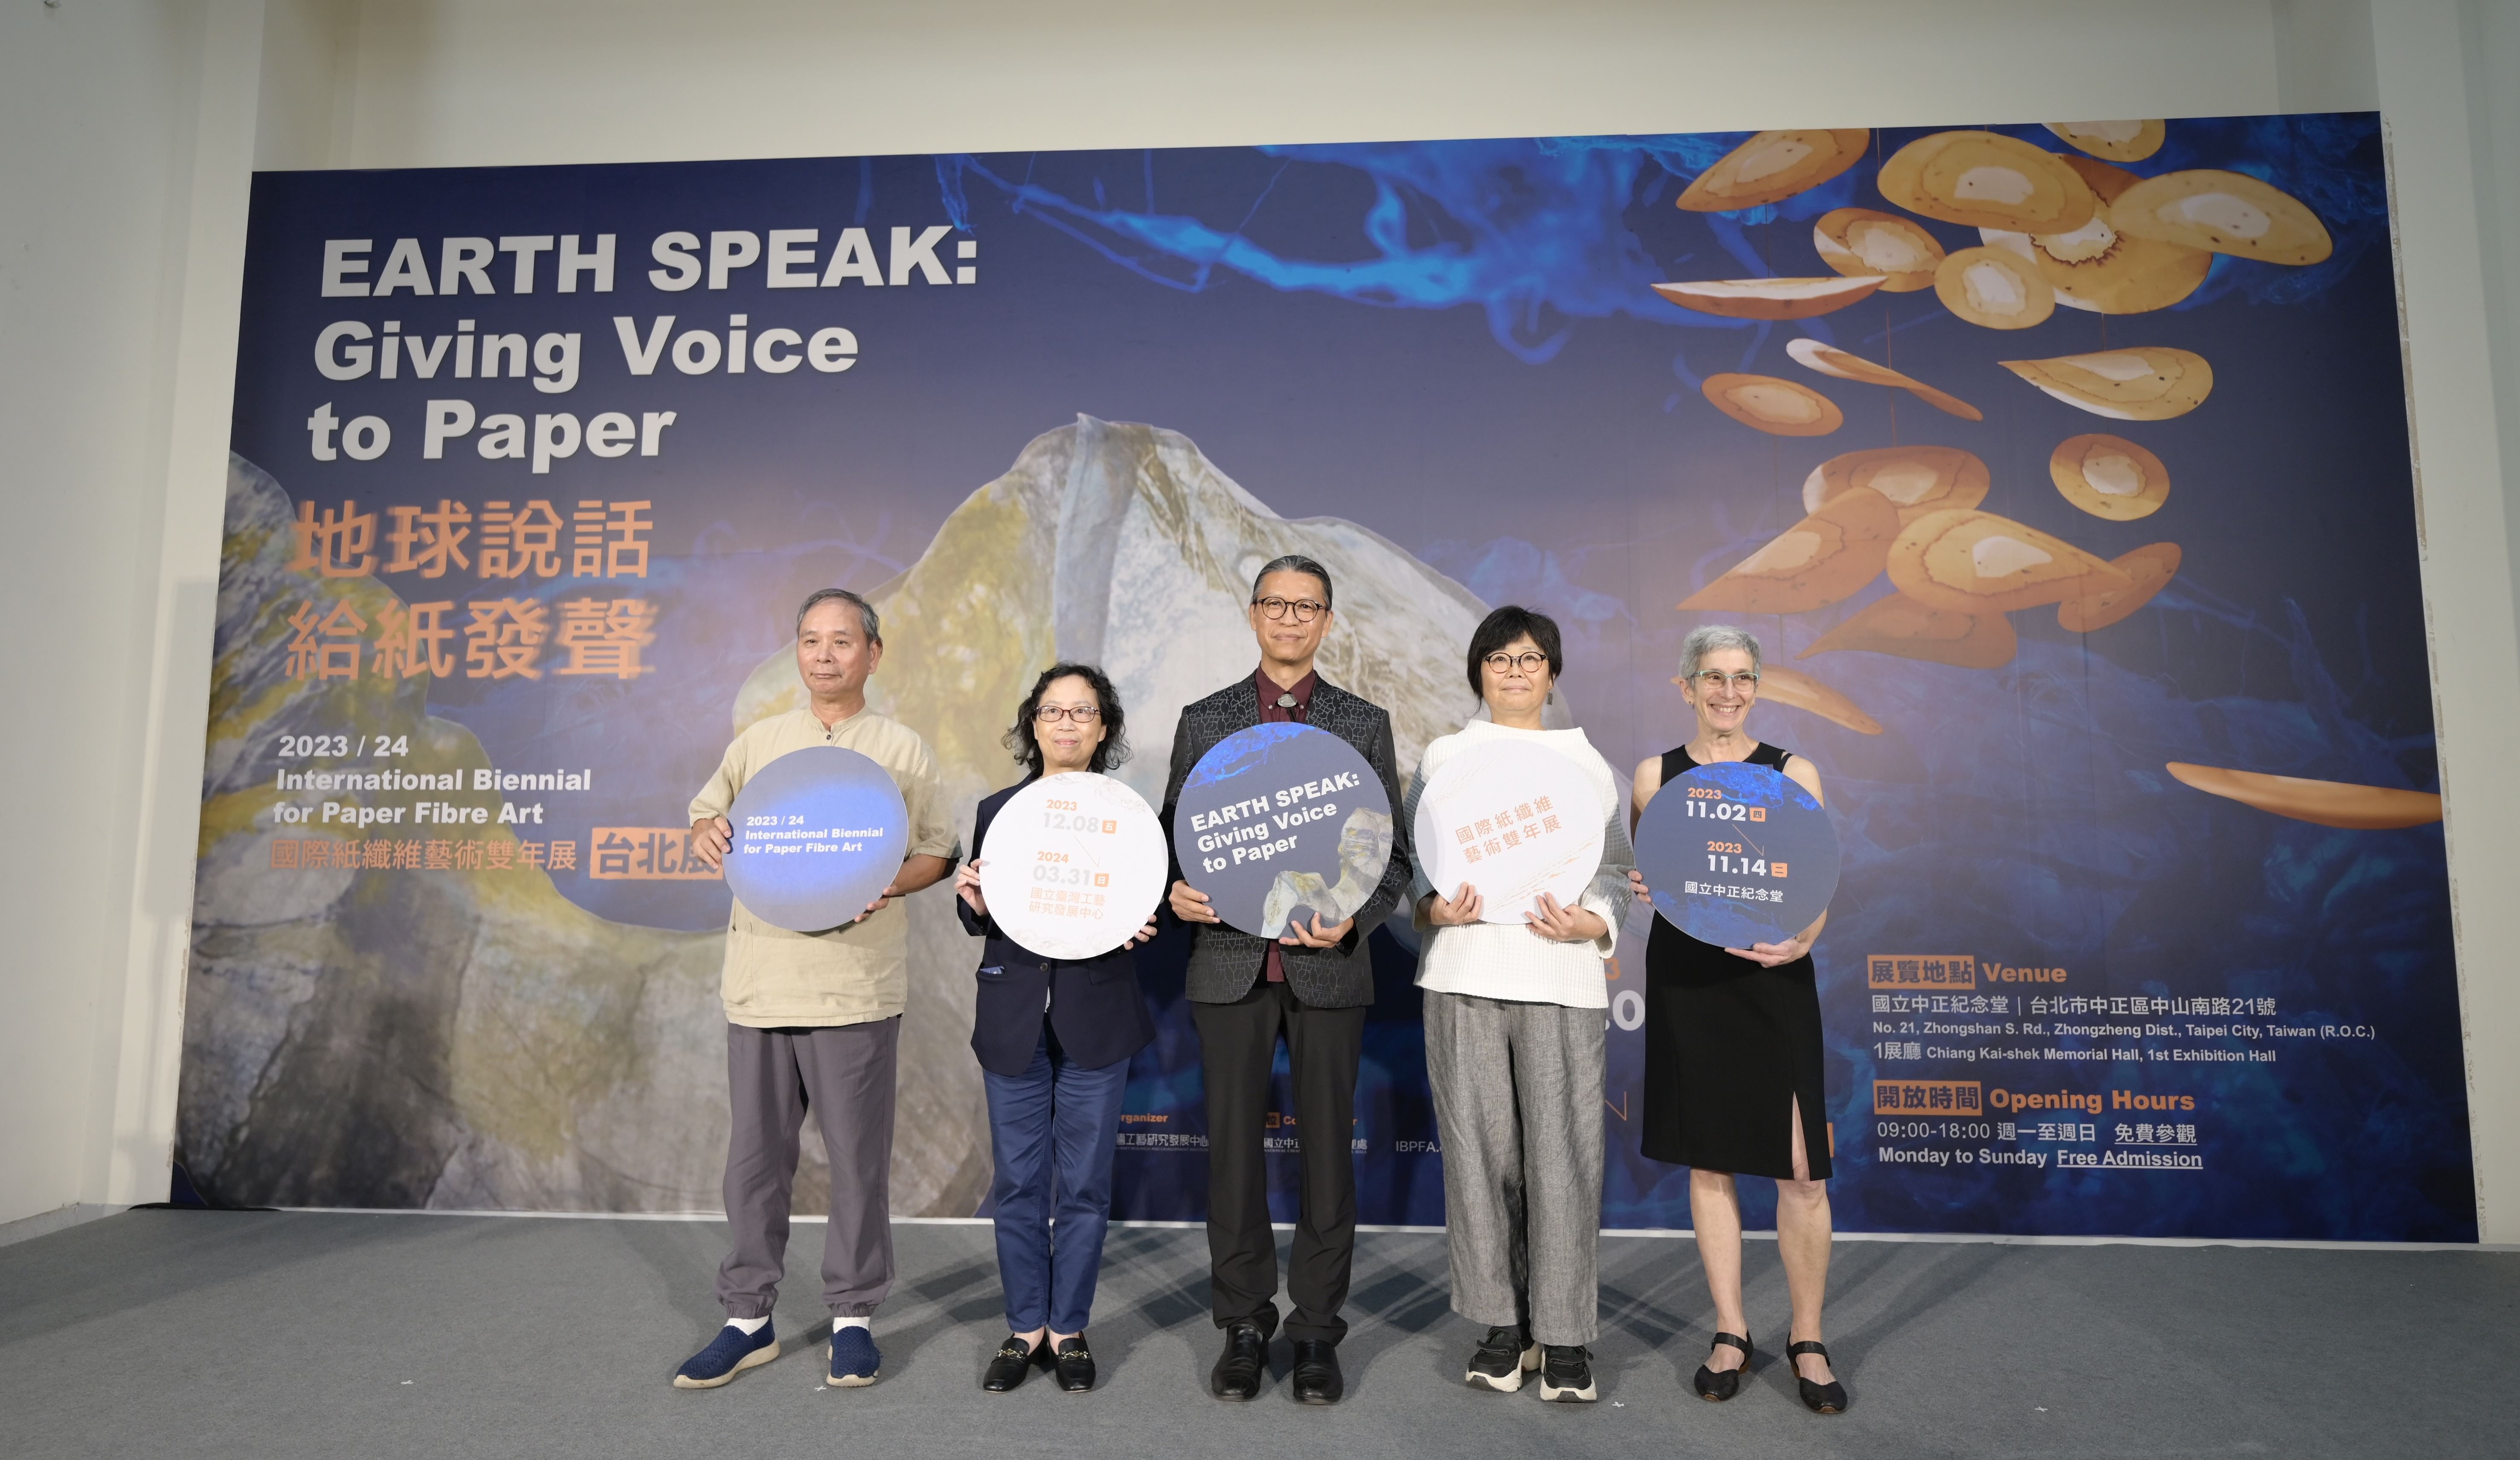 International Biennial for Paper Fibre Art takes place in Taipei and Nantou